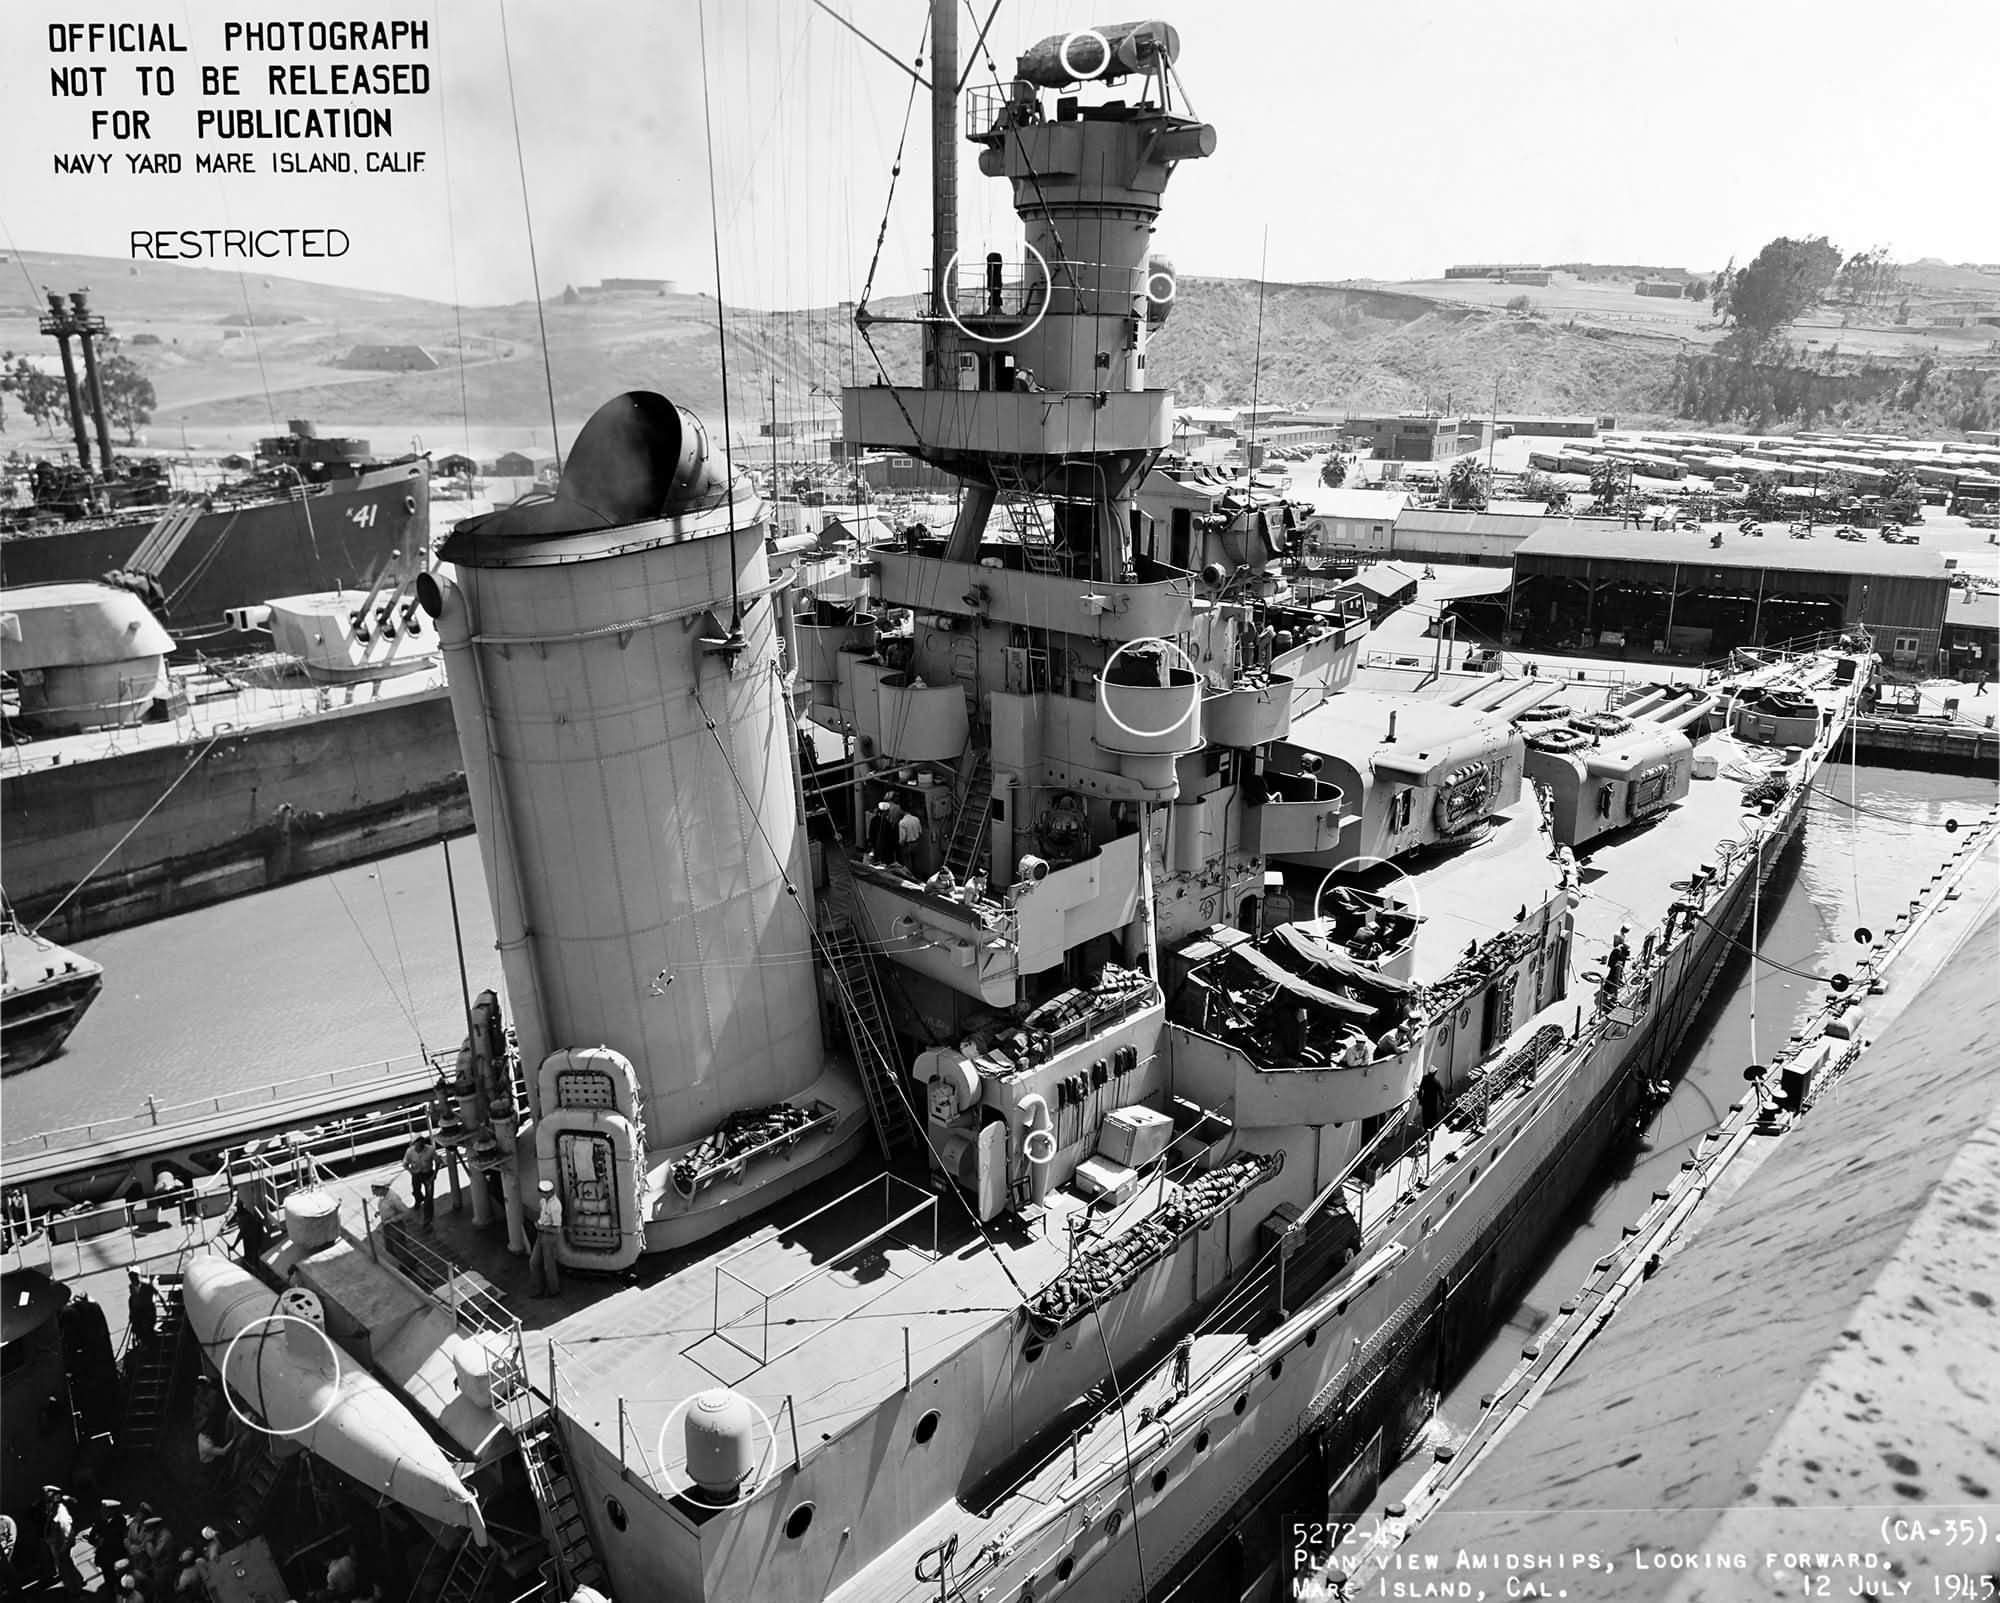 USS Indianapolis (CA-35) forward stack, superstructure and hull July 1945